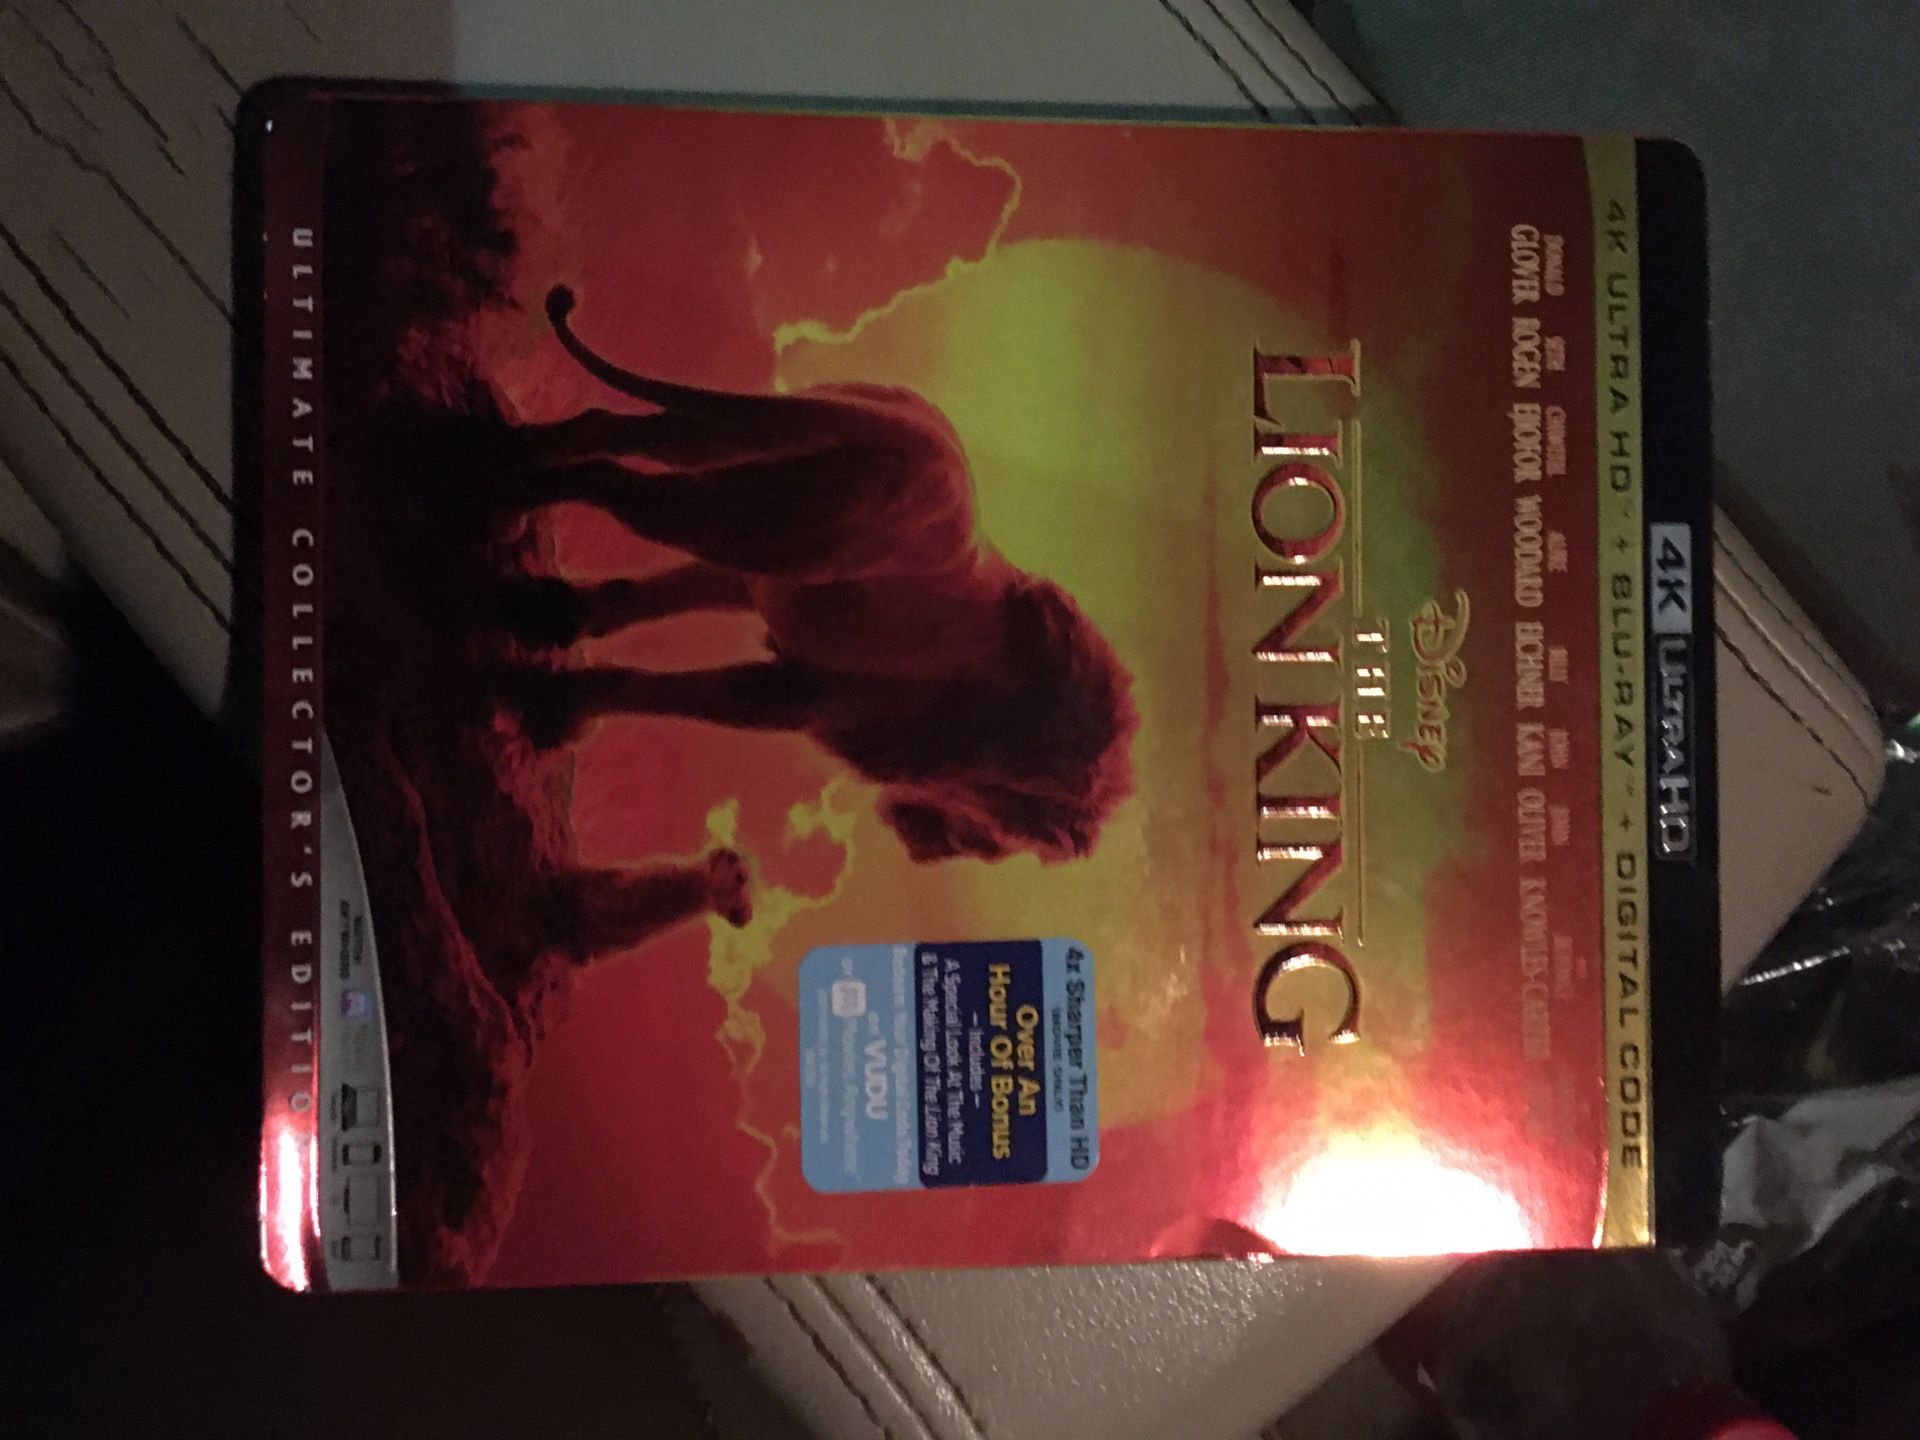 Th Lion King 4K the new one